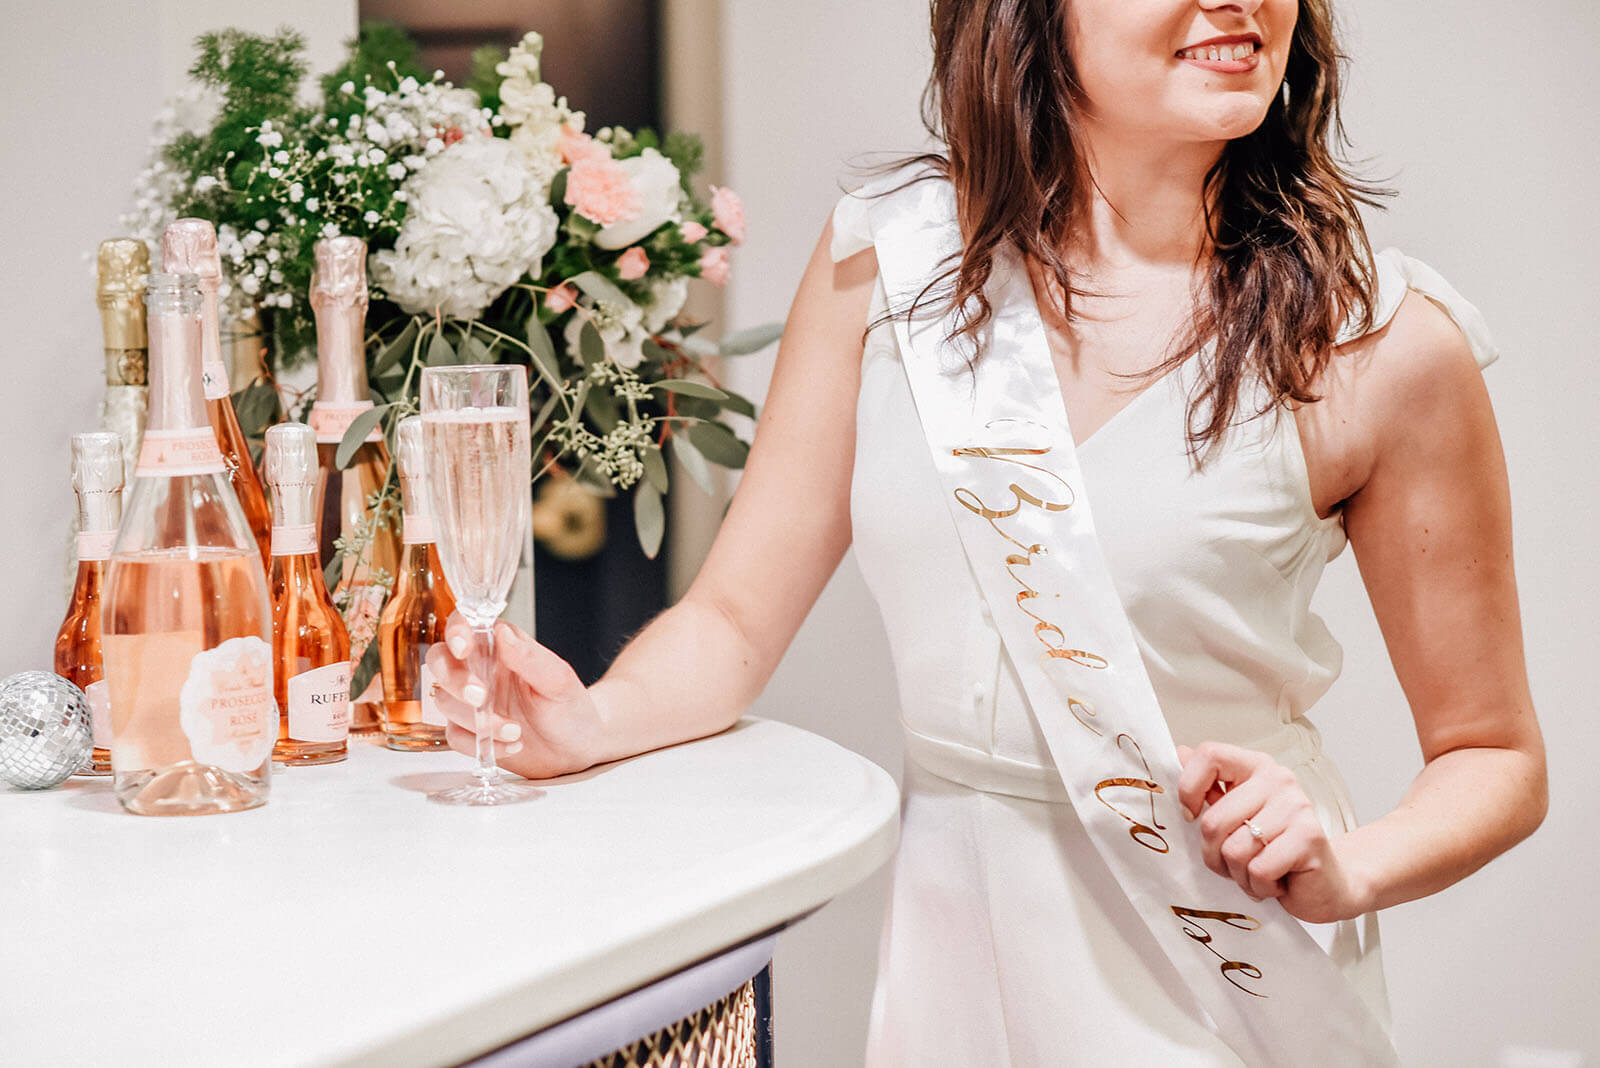 Woman wearing a 'bride to be' sash holding a glass of champagne leaning on the concession stand bar